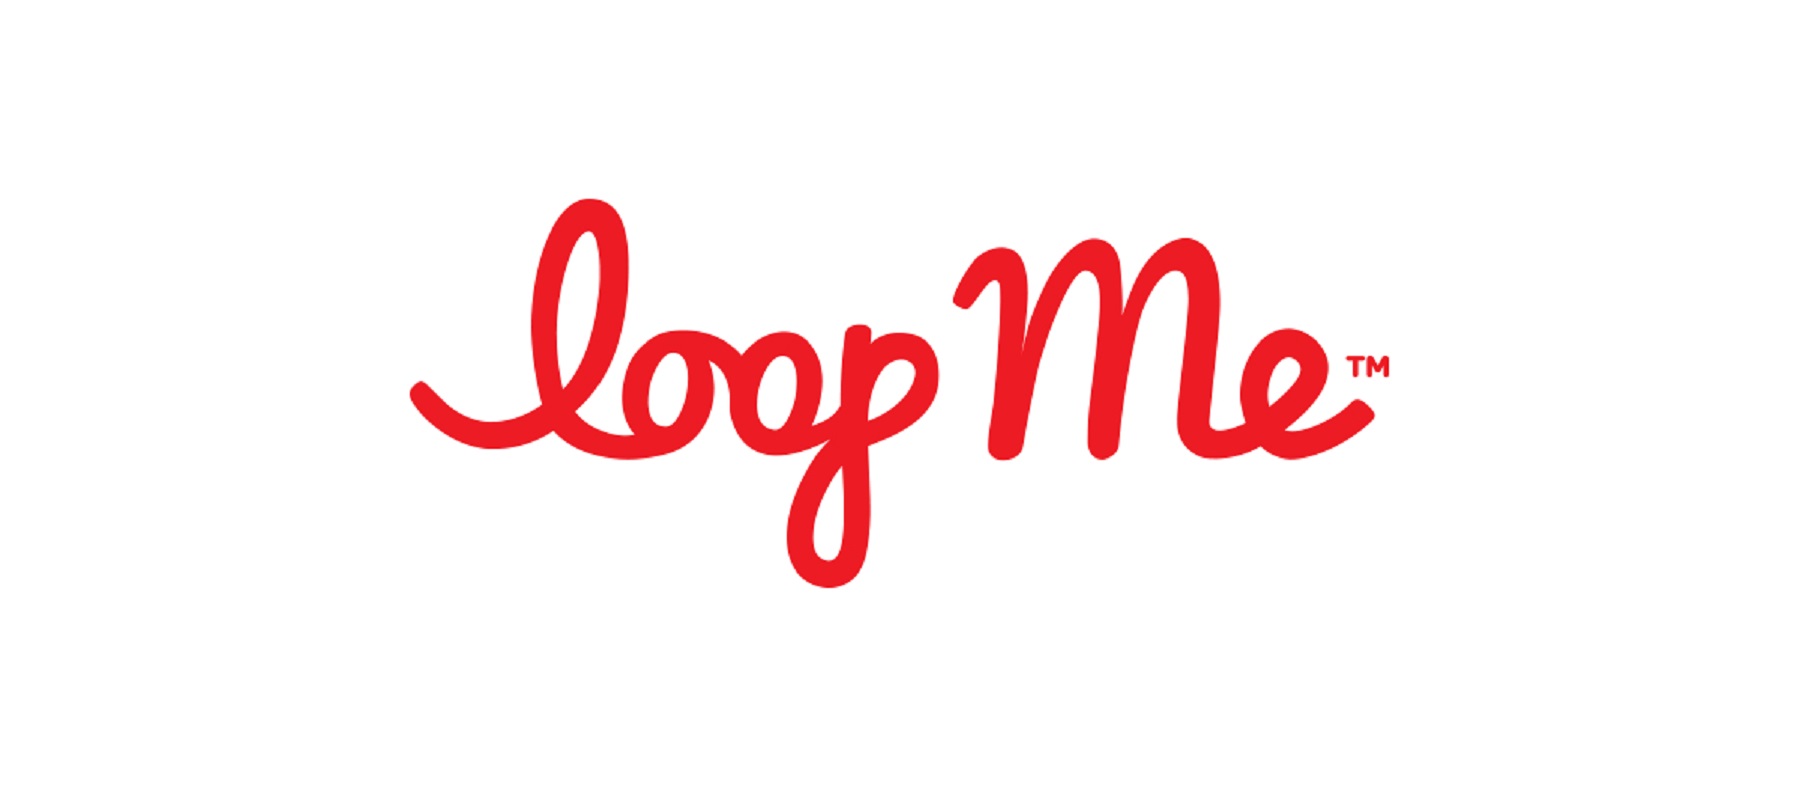 LoopMe achieves carbon neutrality helping create a sustainable digital advertising ecosystem